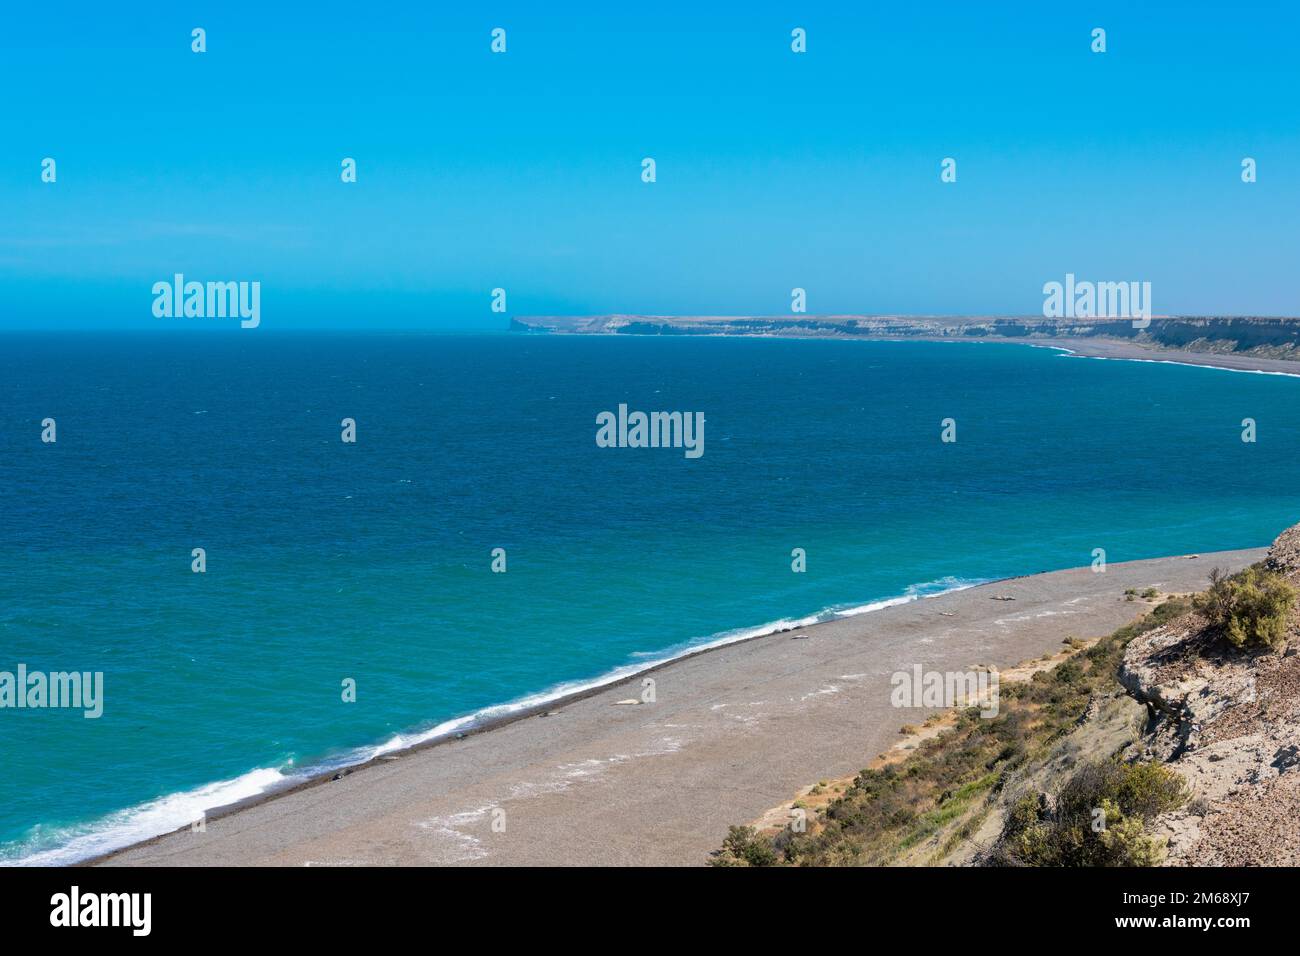 A beach in Peninsula Valdes, Province of Chubut, Argentina Stock Photo